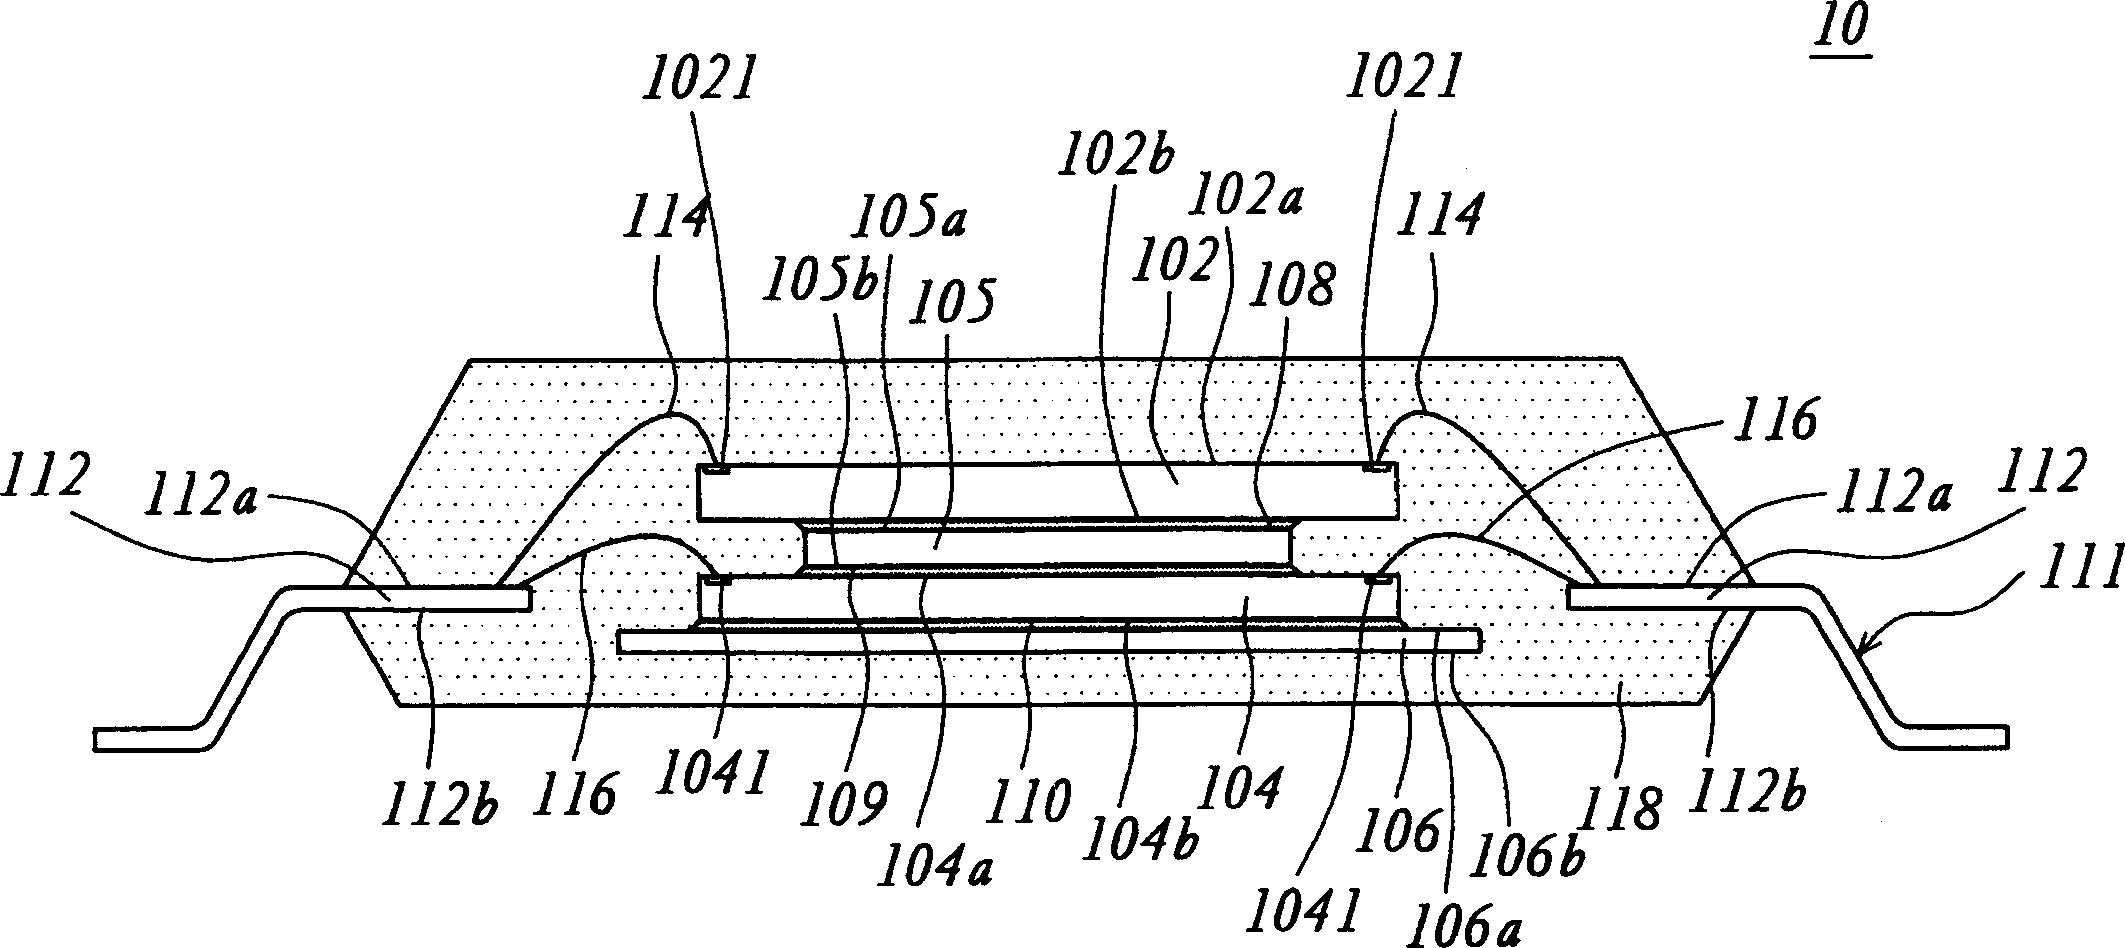 Encapsulation structure for multiple chips